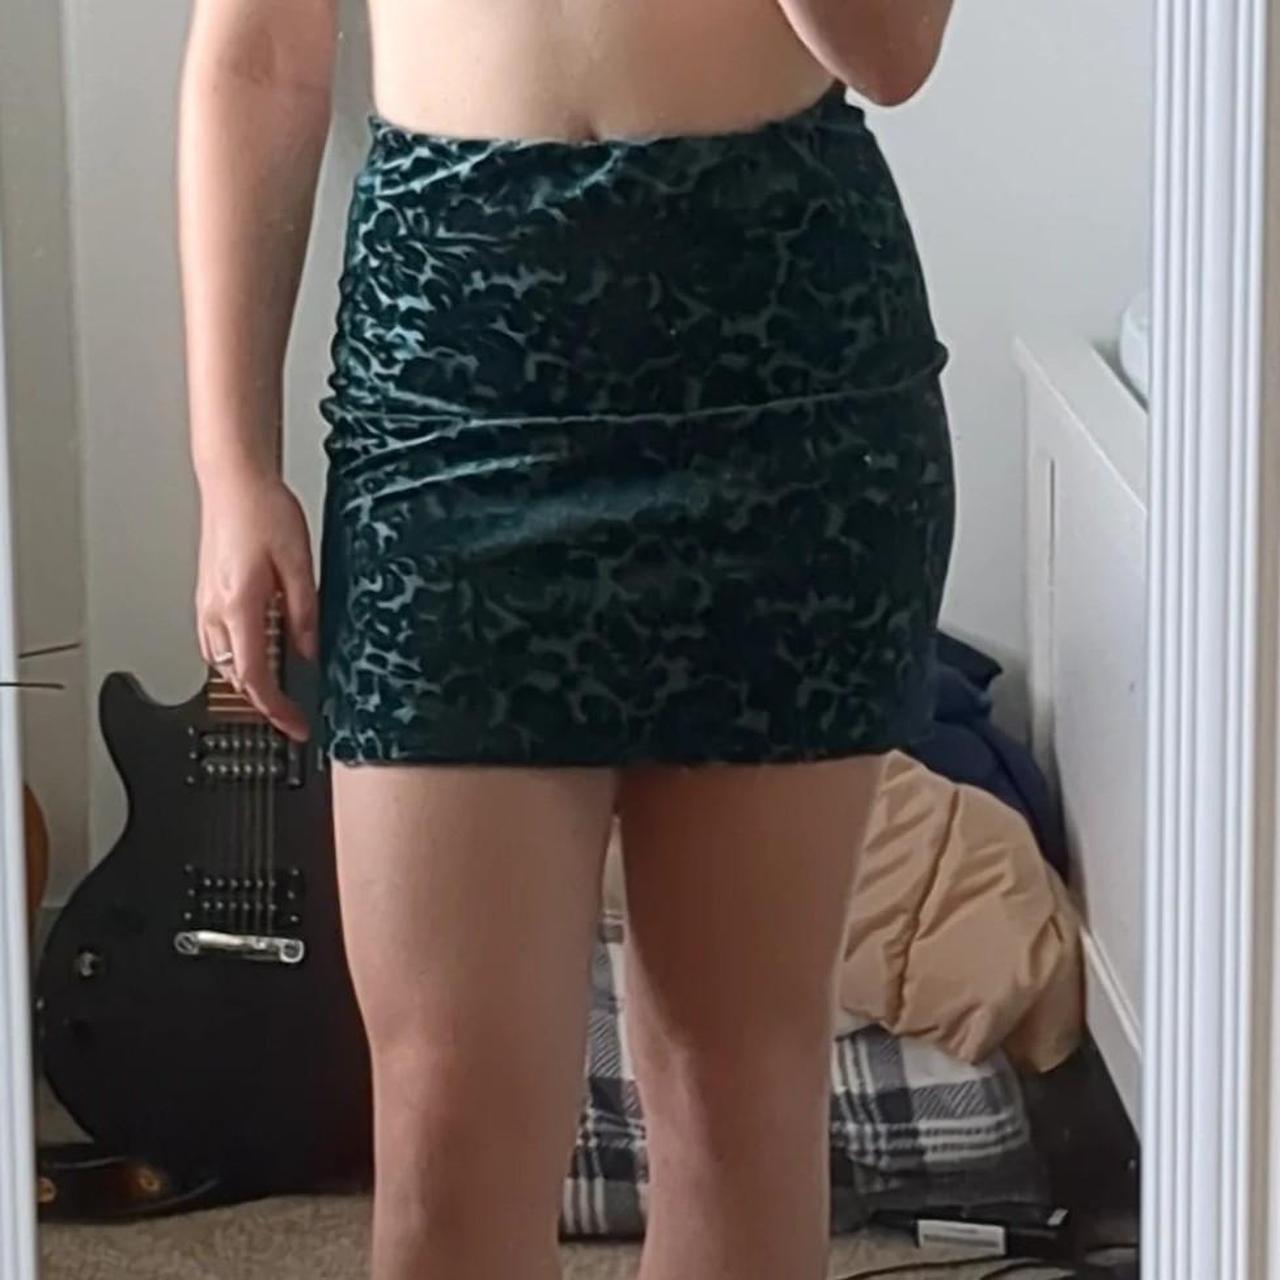 Live To Be Spoiled Women's Green Skirt